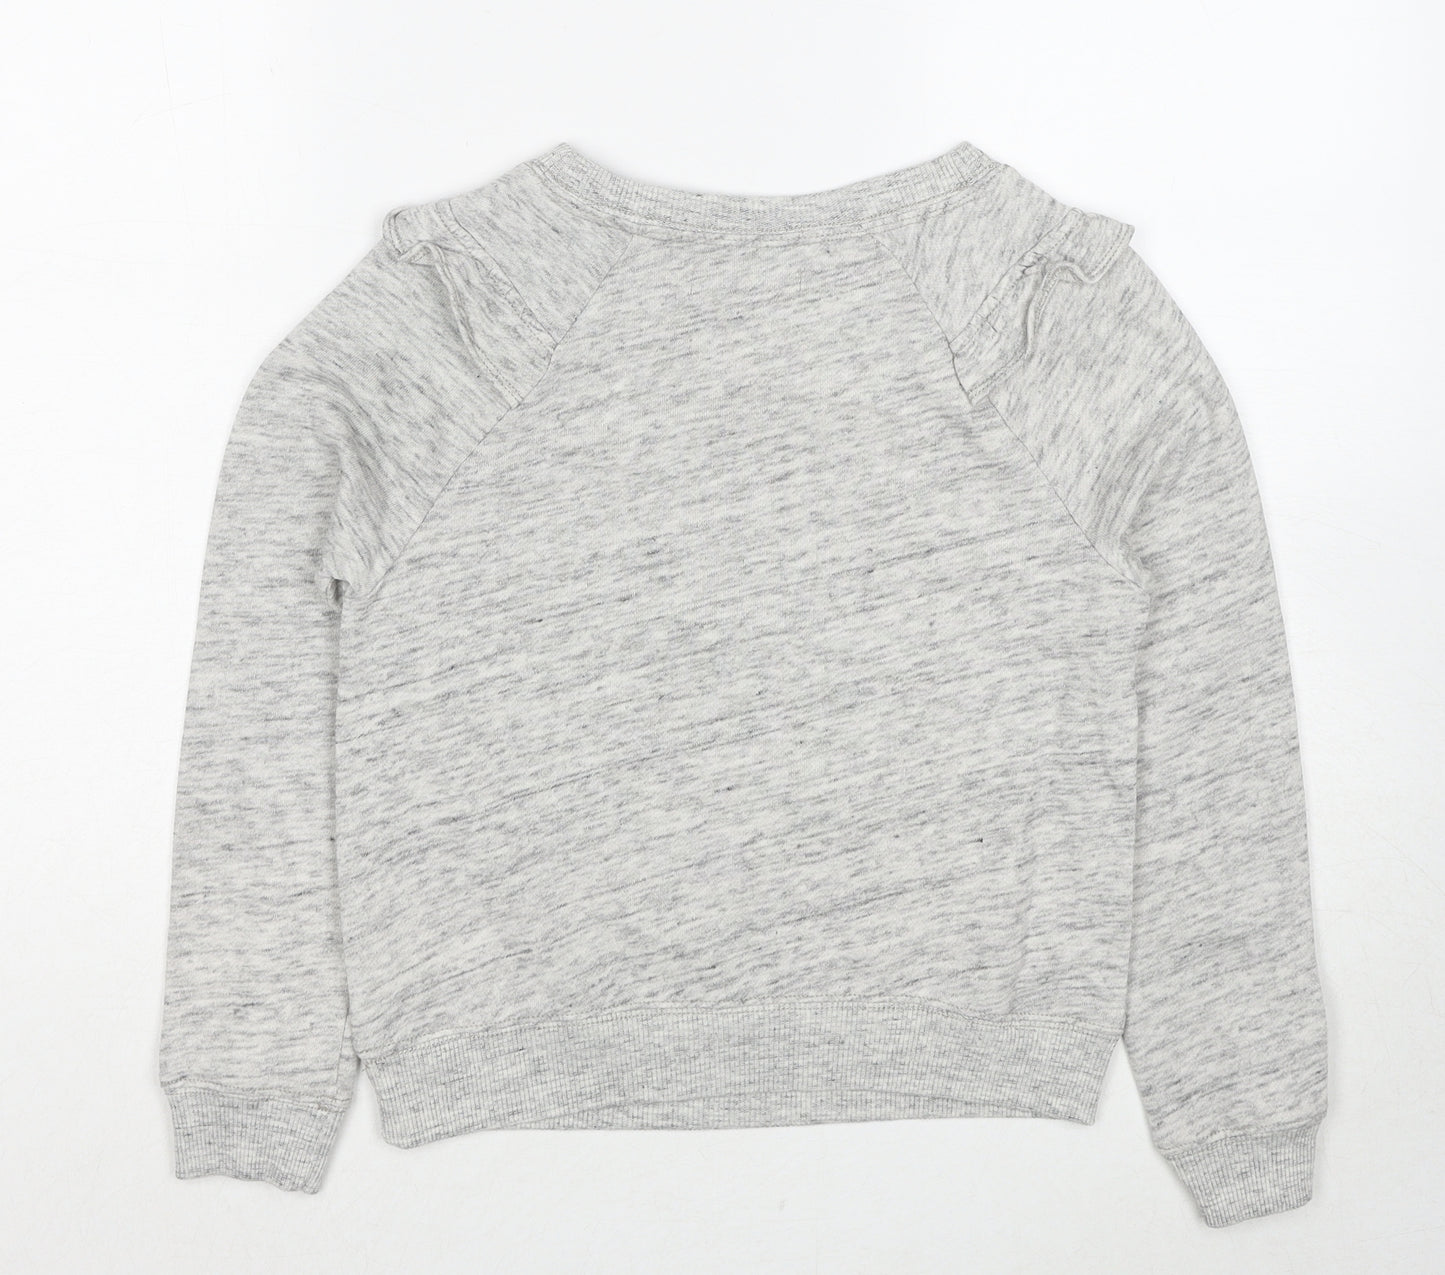 Abercrombie & Fitch Girls Grey Round Neck Geometric Cotton Pullover Jumper Size 11-12 Years Pullover - Be Inspiring